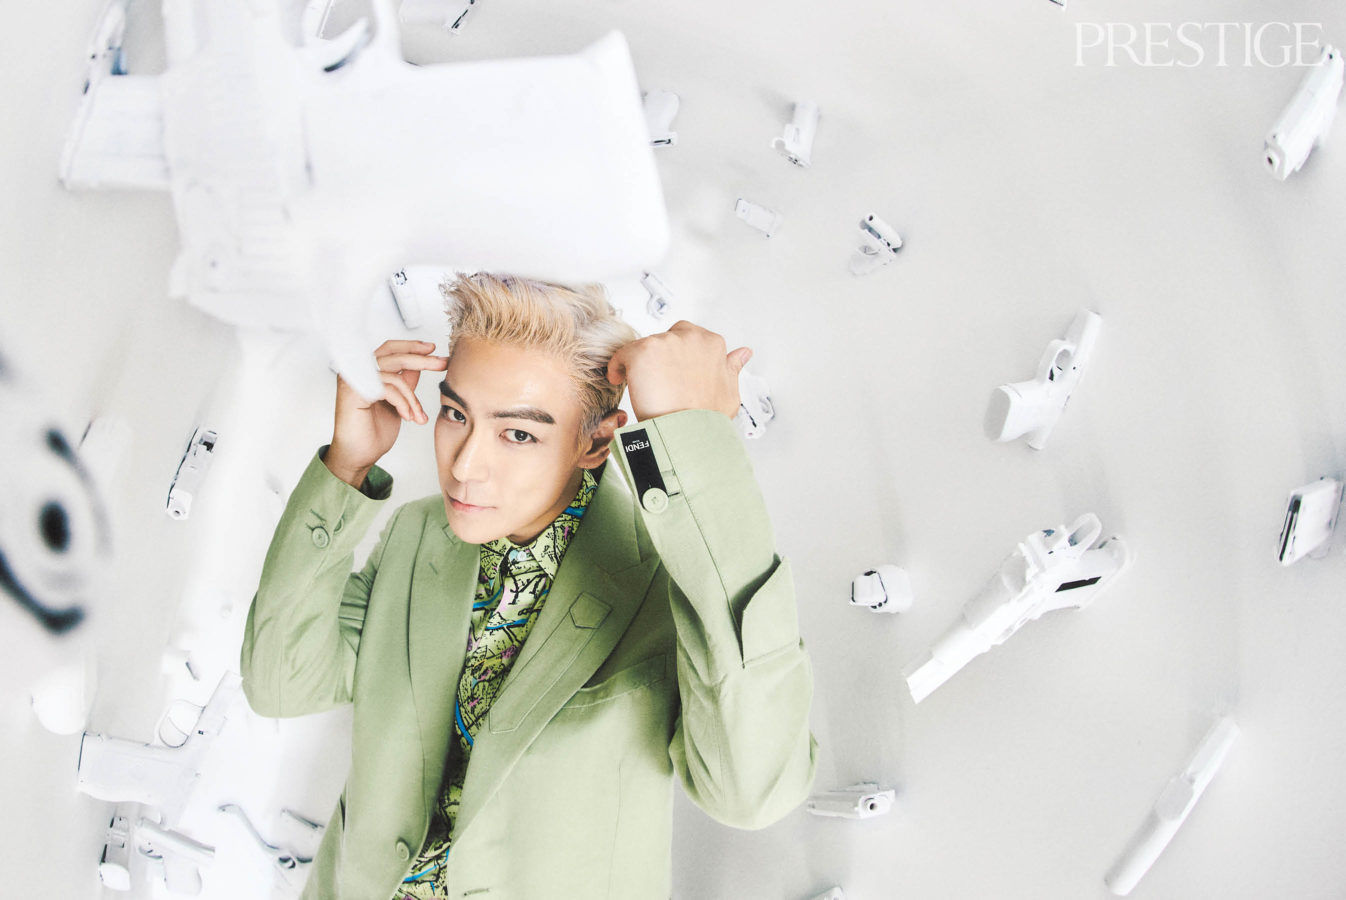 T.O.P Prestige HK March 2022 Cover: A Letter from the Publisher